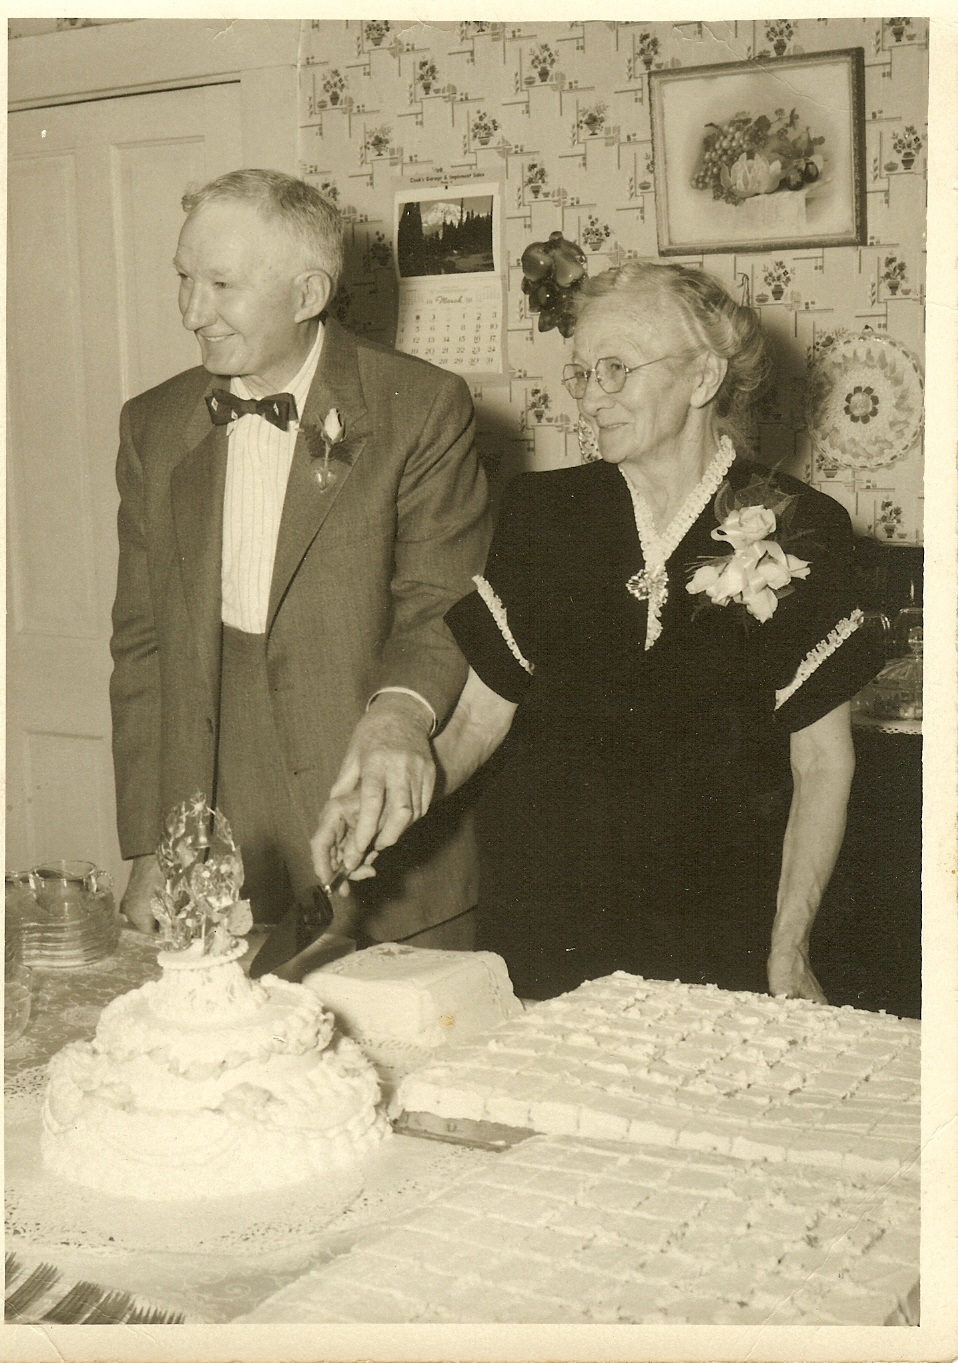  - Dennis & Lillie Weir 50th anniverisary happy time-1956-3